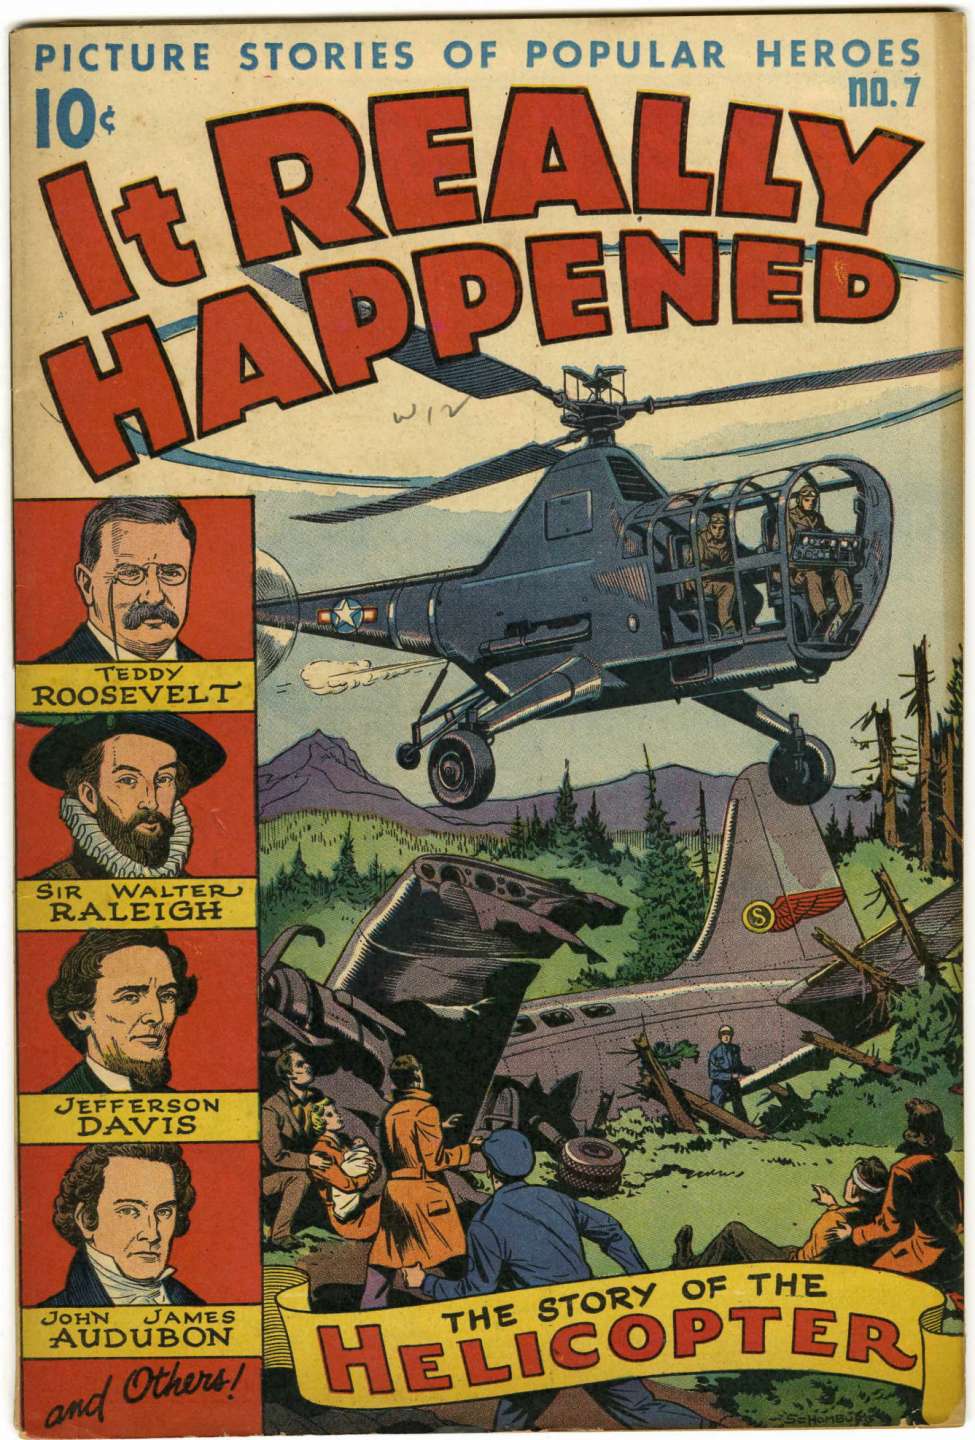 Comic Book Cover For It Really Happened 7 - Version 1